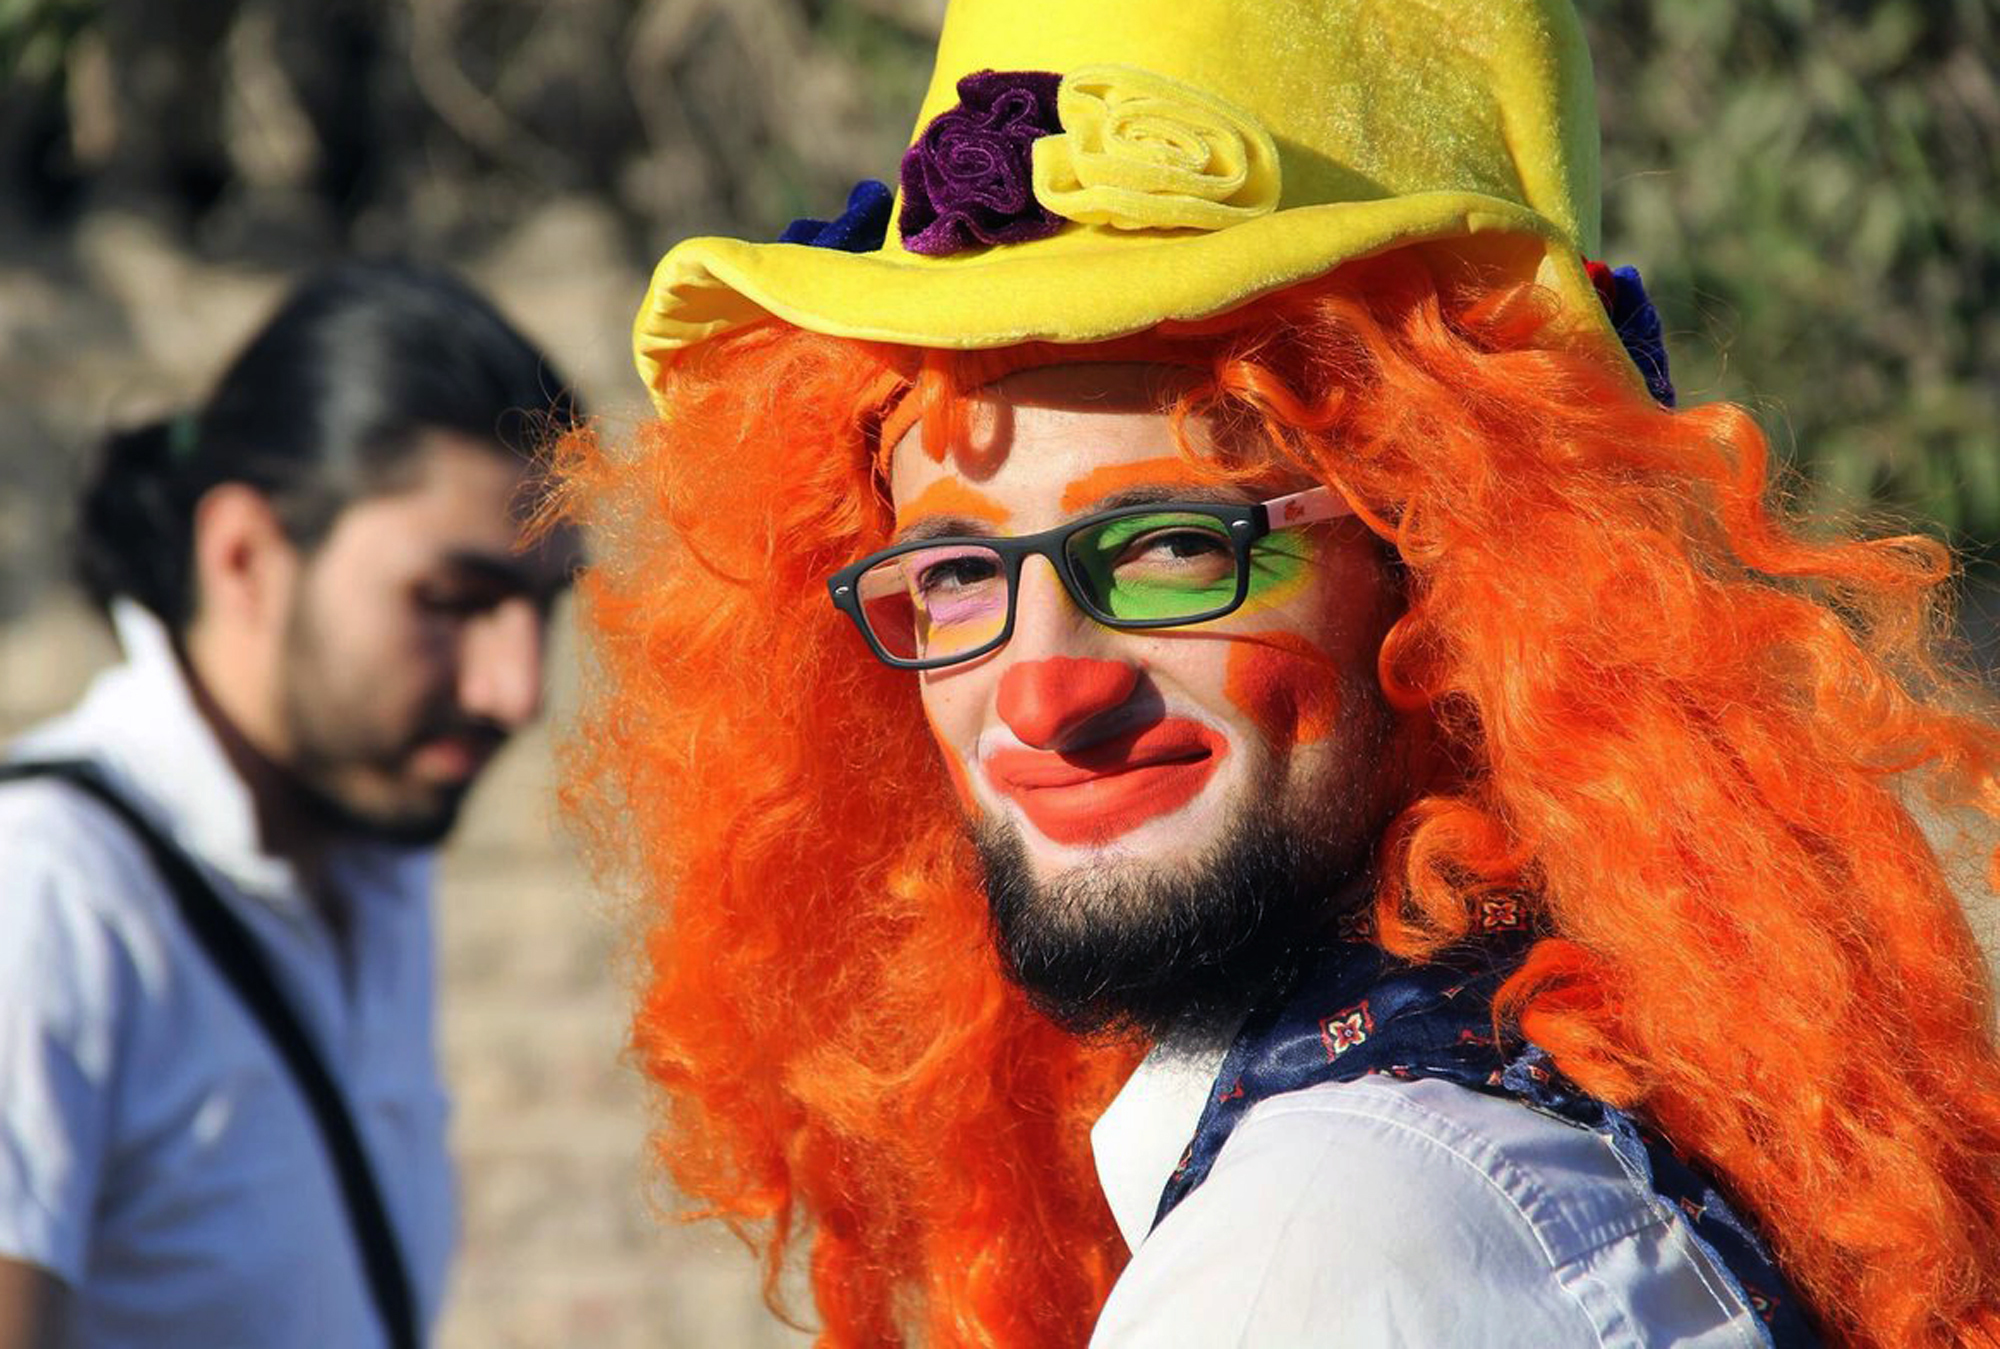 This undated photo courtesy of Ahmad al-Khatib, a media activist in Aleppo, shows Syrian social worker Anas al-Basha, 24, dressed as a clown, while posing for a photograph in Aleppo, Syria. (Uncredited—AP)